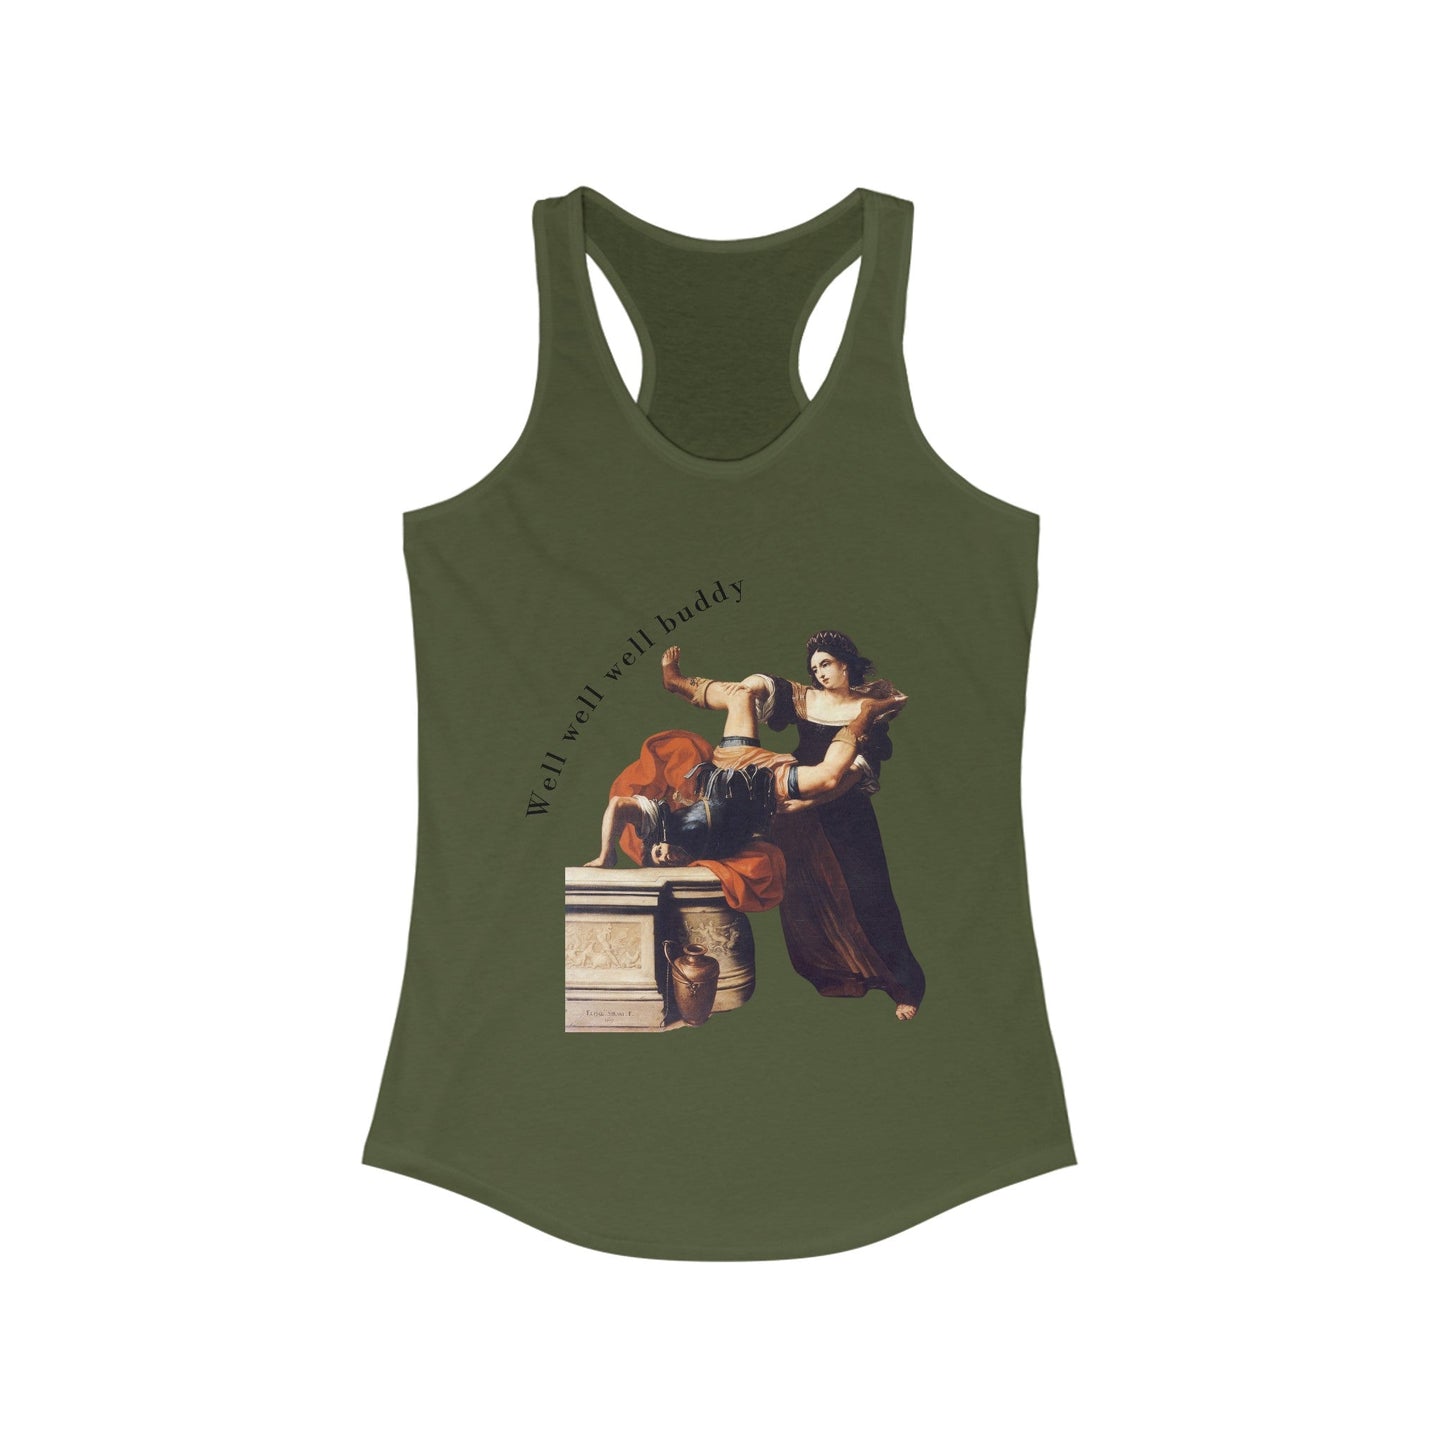 Well Well Well Buddy Timoclea Kills the Captain of Alexander the Great Women's Ideal Racerback Tank